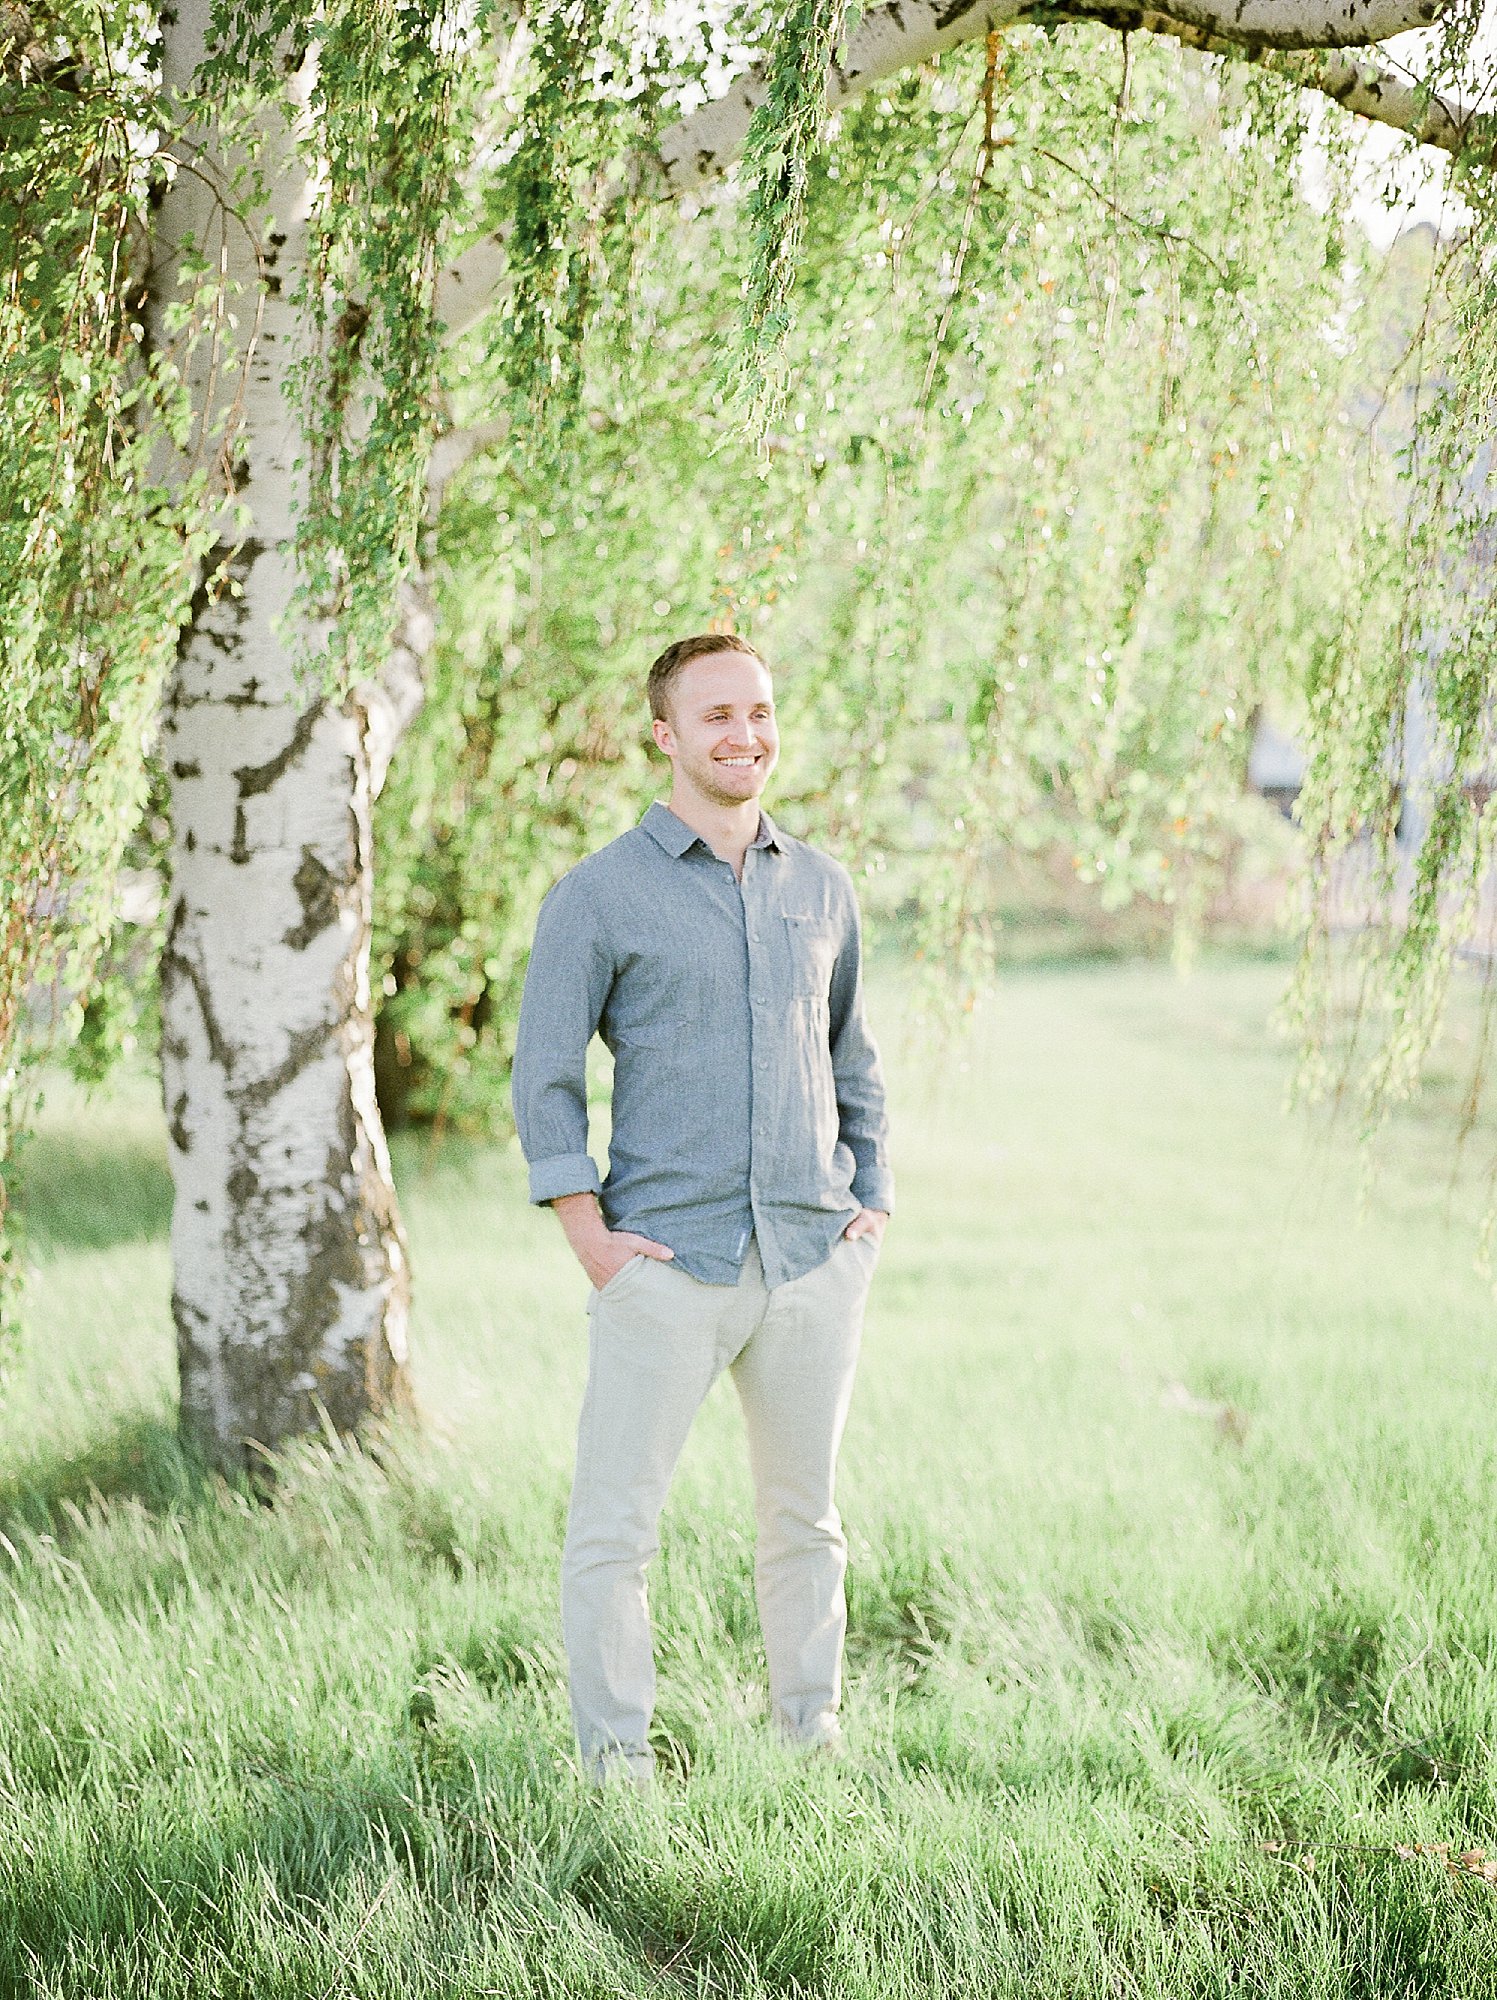 canadian groom, canadian wedding photographer, wedding guest outfit ideas for men